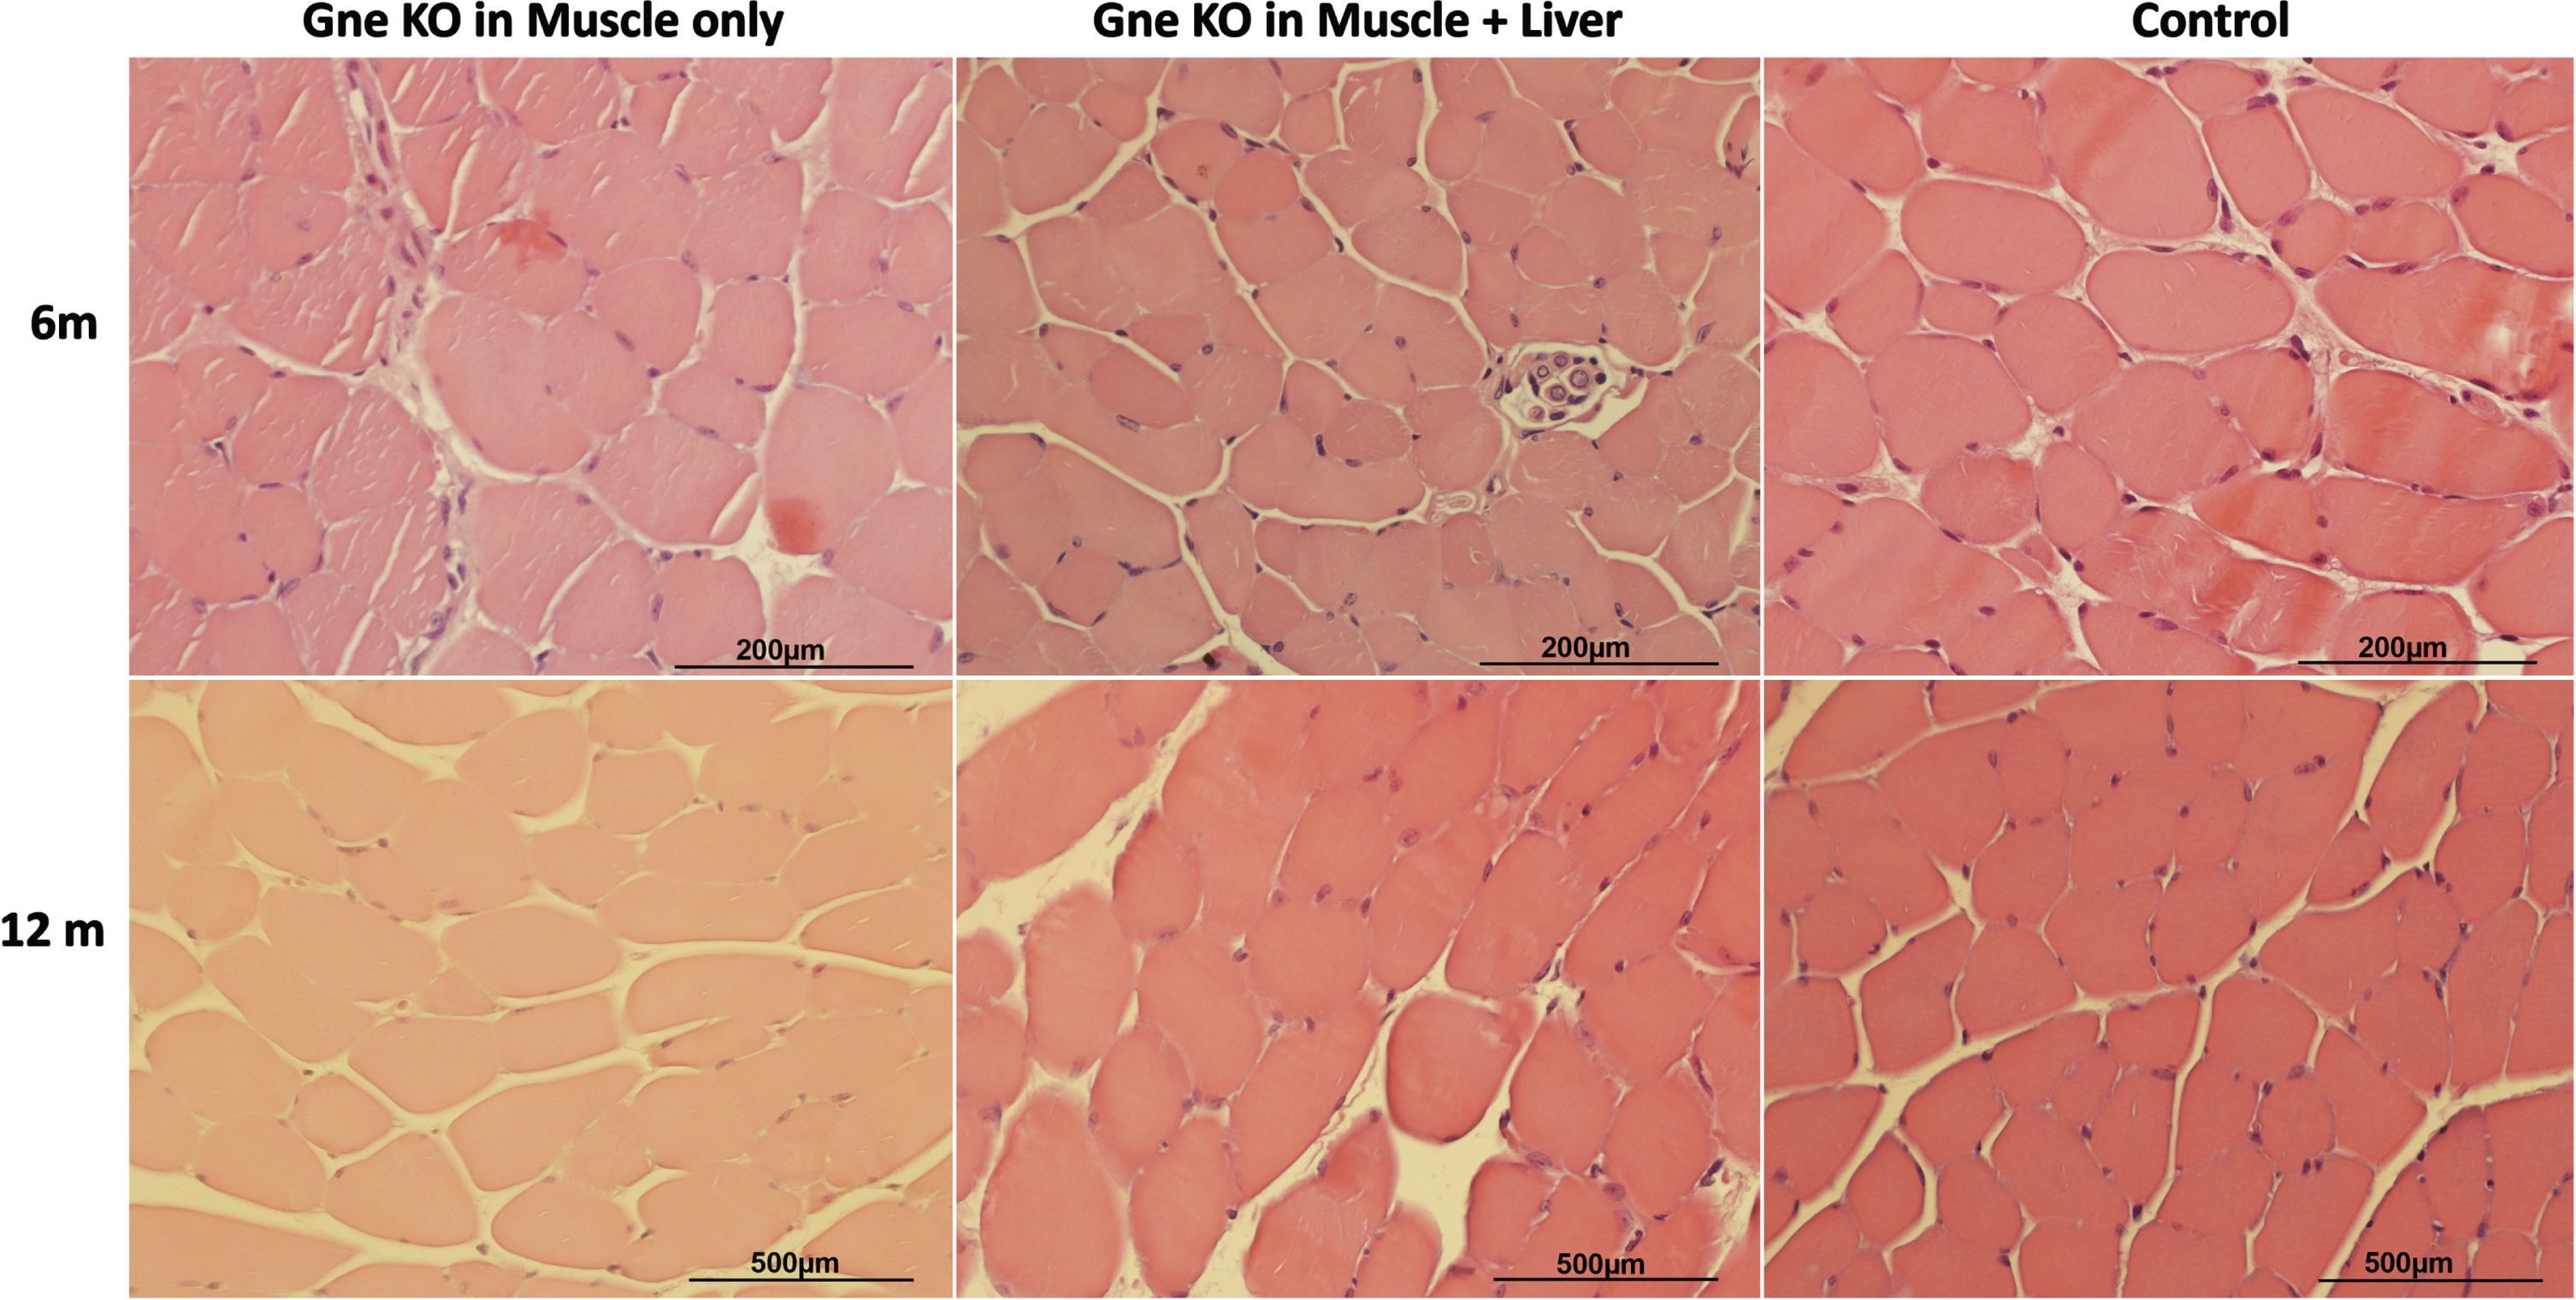 Muscle Histological Sections. Representative H&E tibialis anterior histological sections of muscle Gne KO, muscle+liver Gne double KO and control mice 6 and 12 months after GneKO was effective.